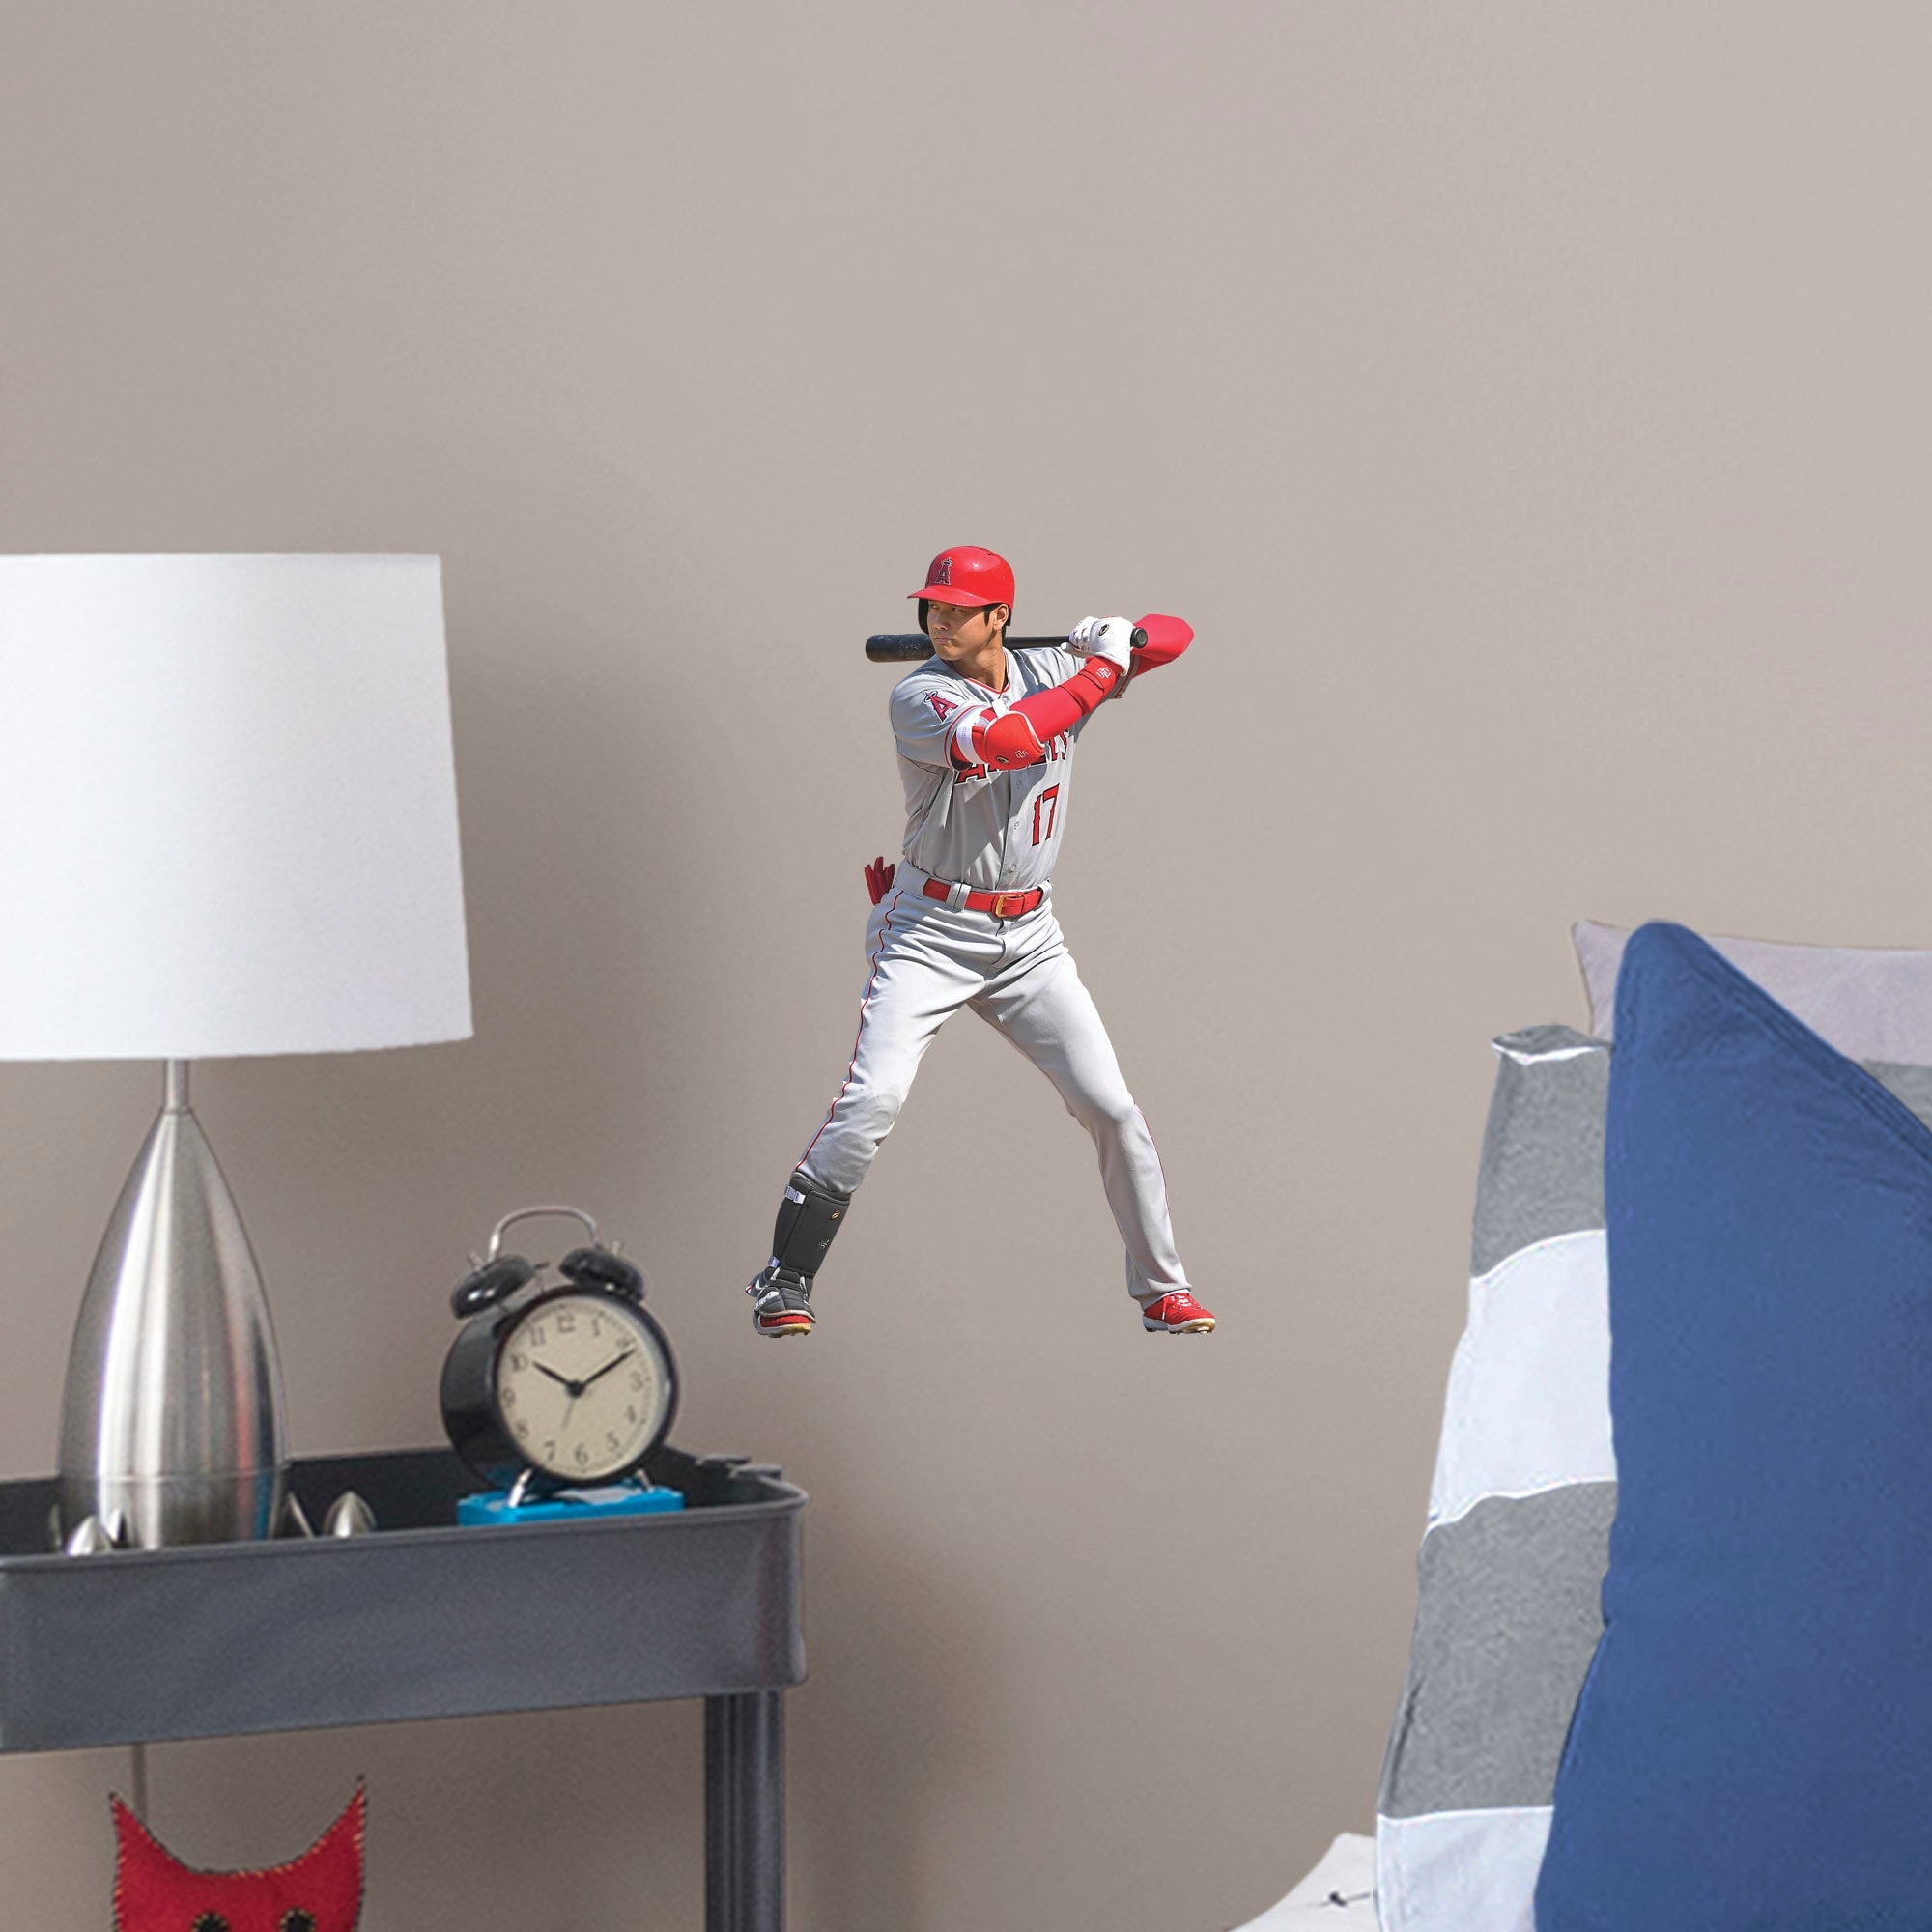 Shohei Ohtani for LA Angels: At Bat - Officially Licensed MLB Removable Wall Decal Large by Fathead | Vinyl